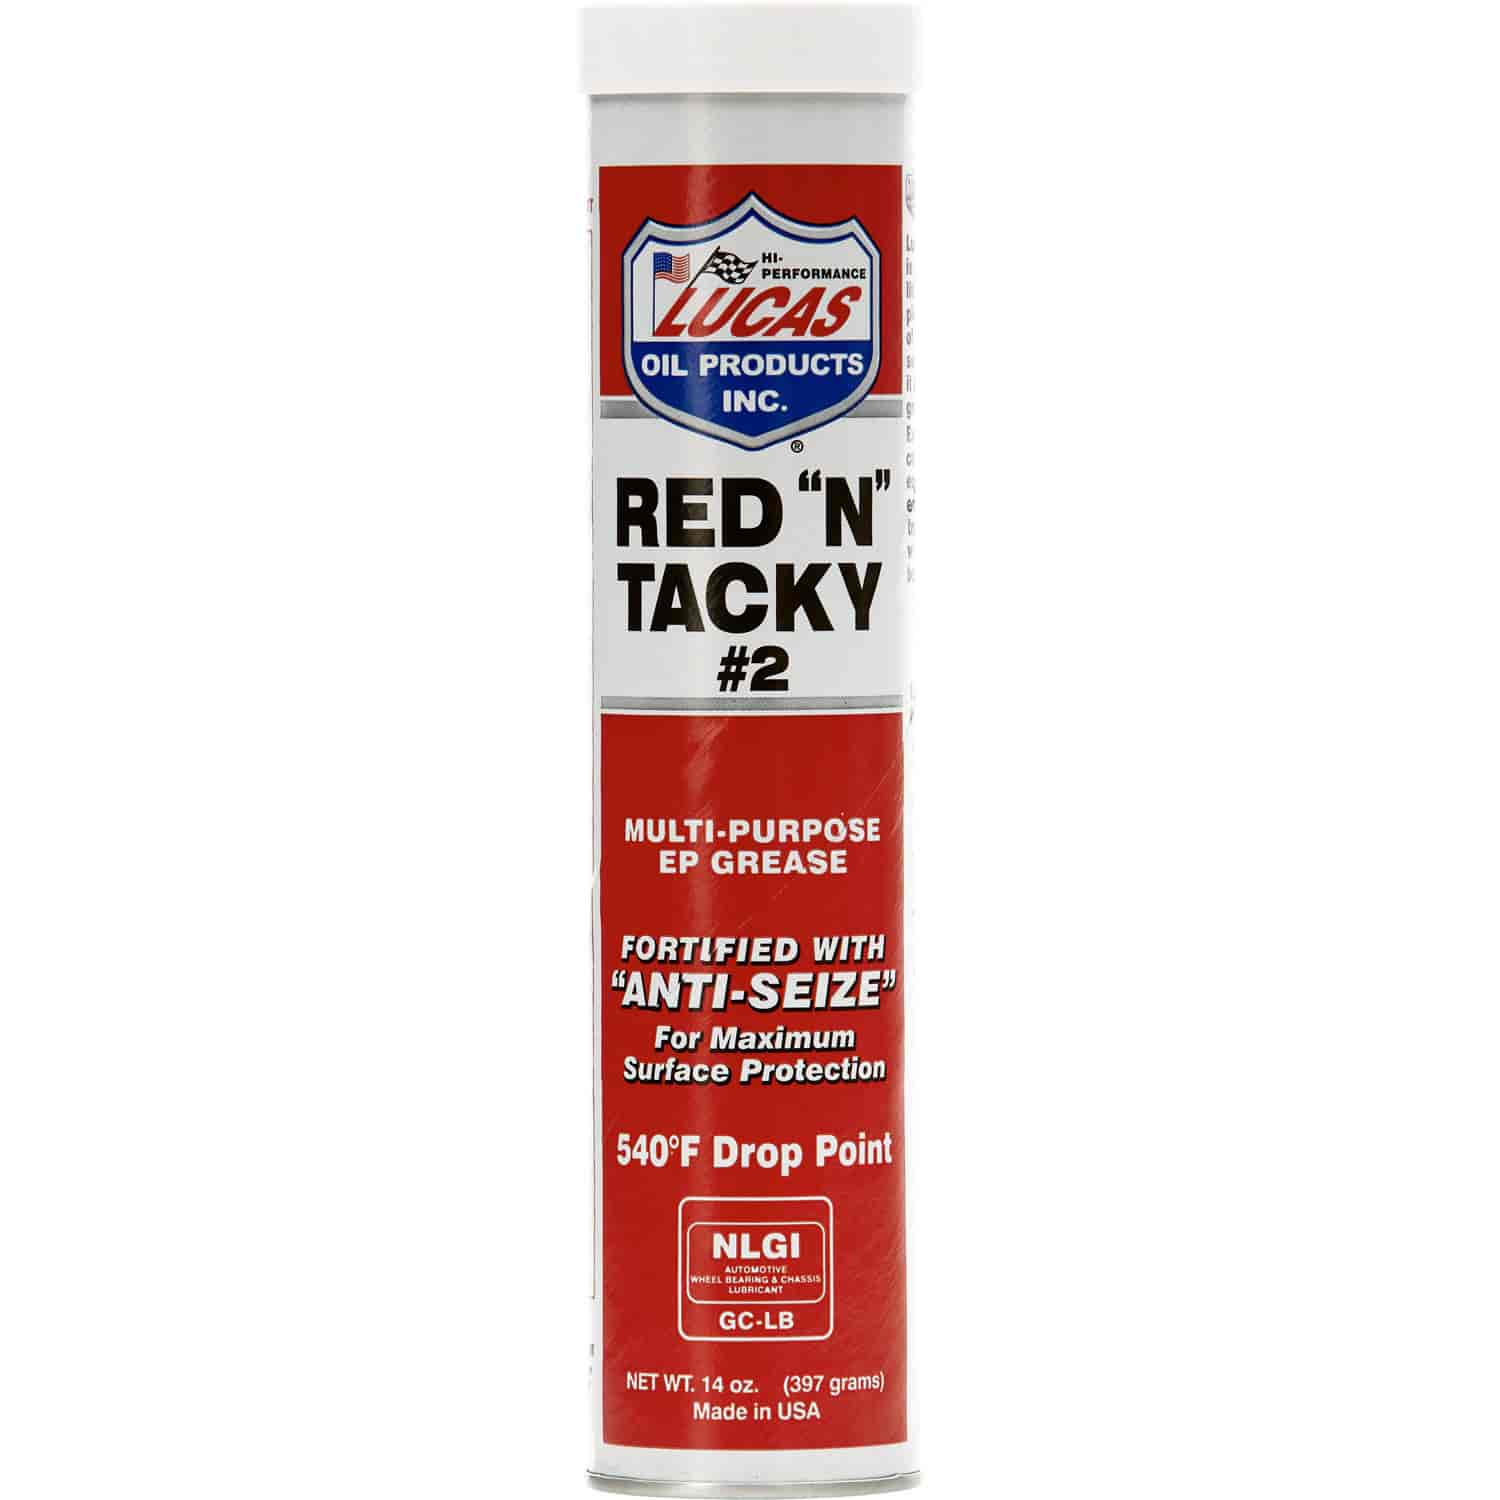 Red "N" Tacky Grease (30) 14 oz. Cartridges